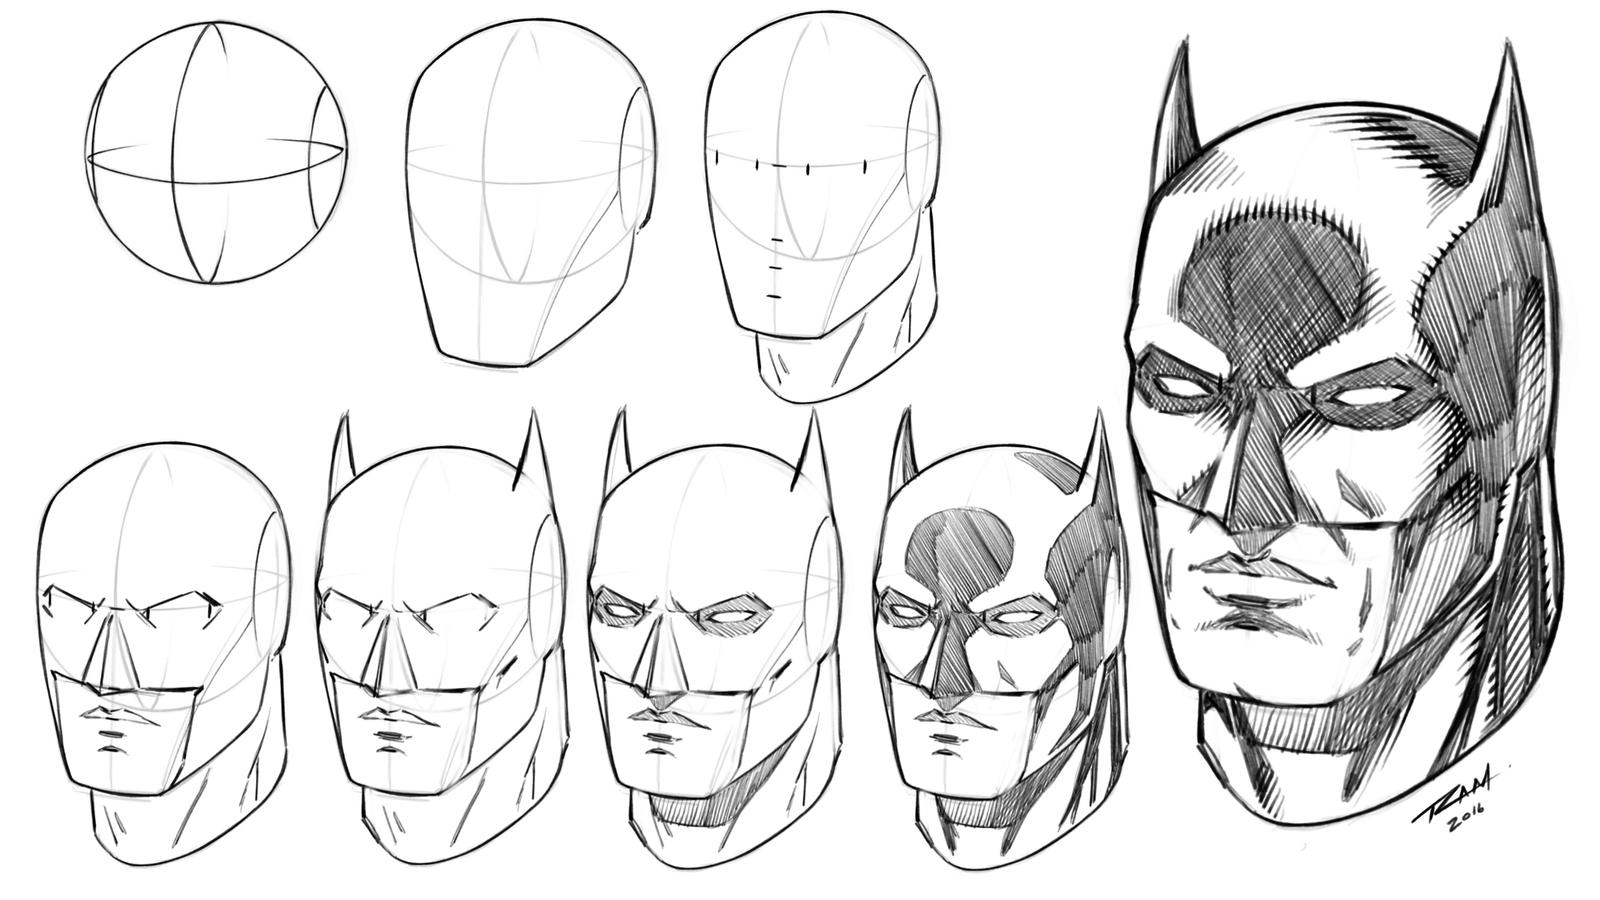 The Iconic Image of the Batman Mask in Animation插图